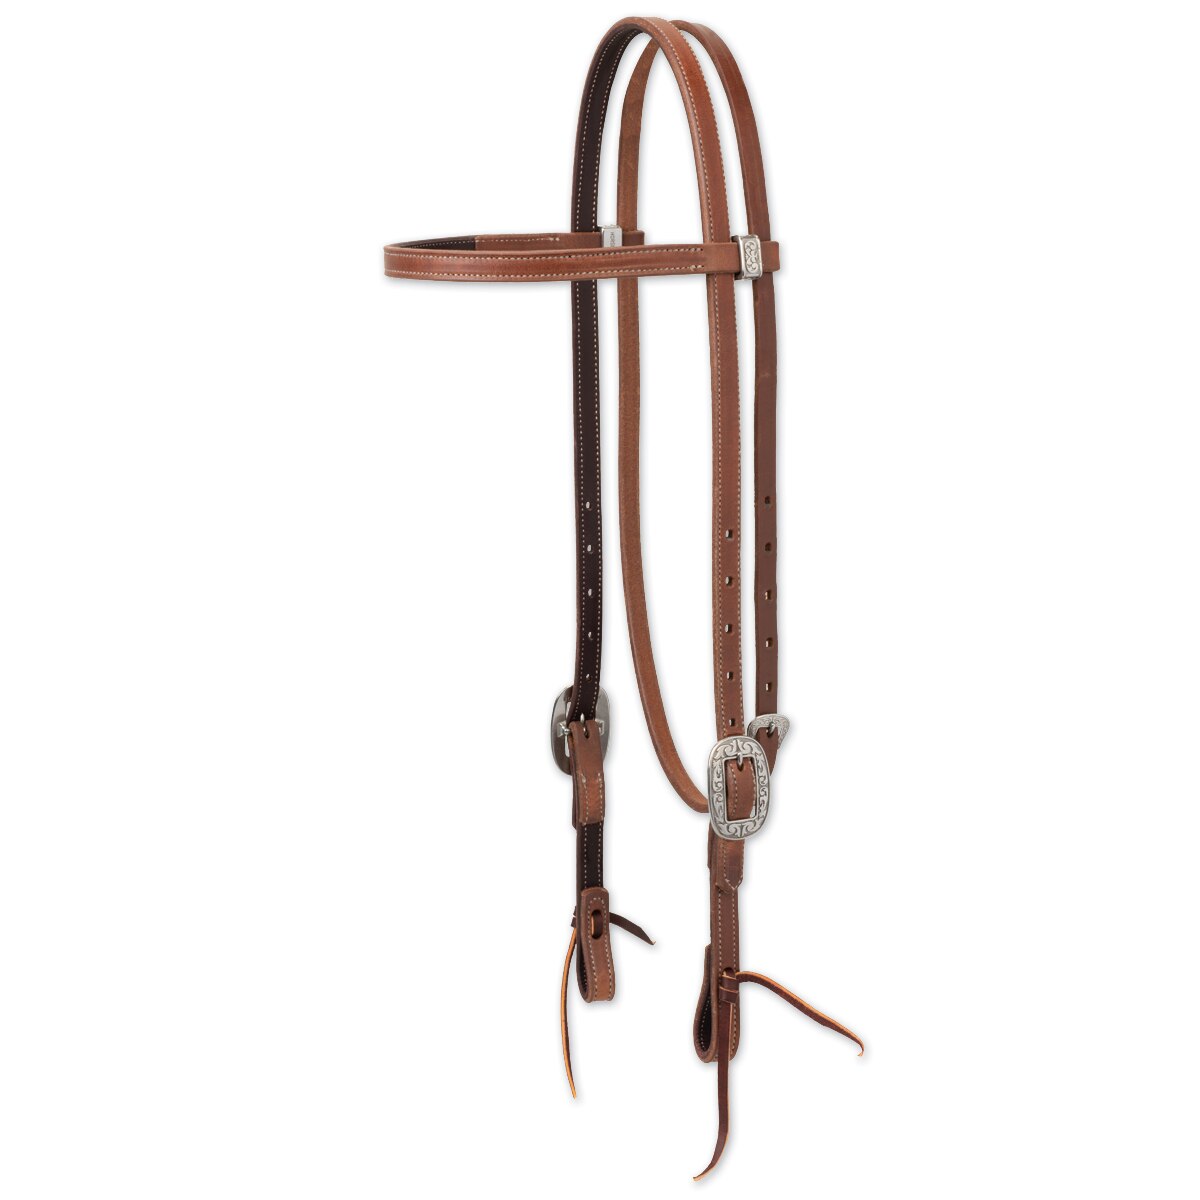 Details about  / Weaver Synergy Latigo Lined Performance Headstall with Floral Designer Hardware